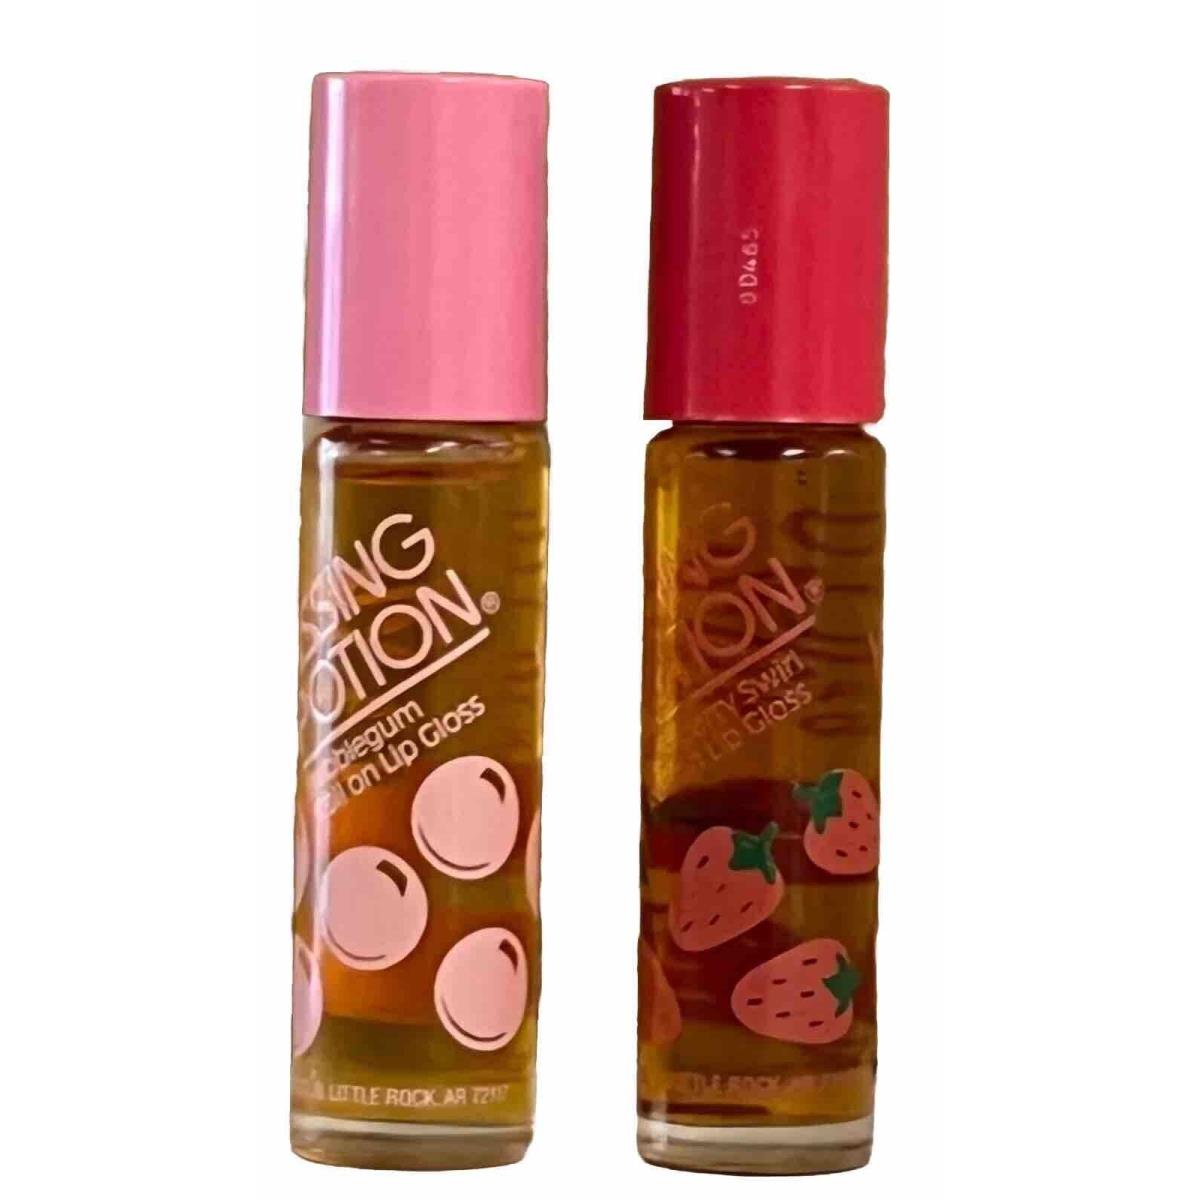 2 Maybelline Kissing Potion Roll On Lip Gloss Bubble Gum/strawberry Swirl Glass